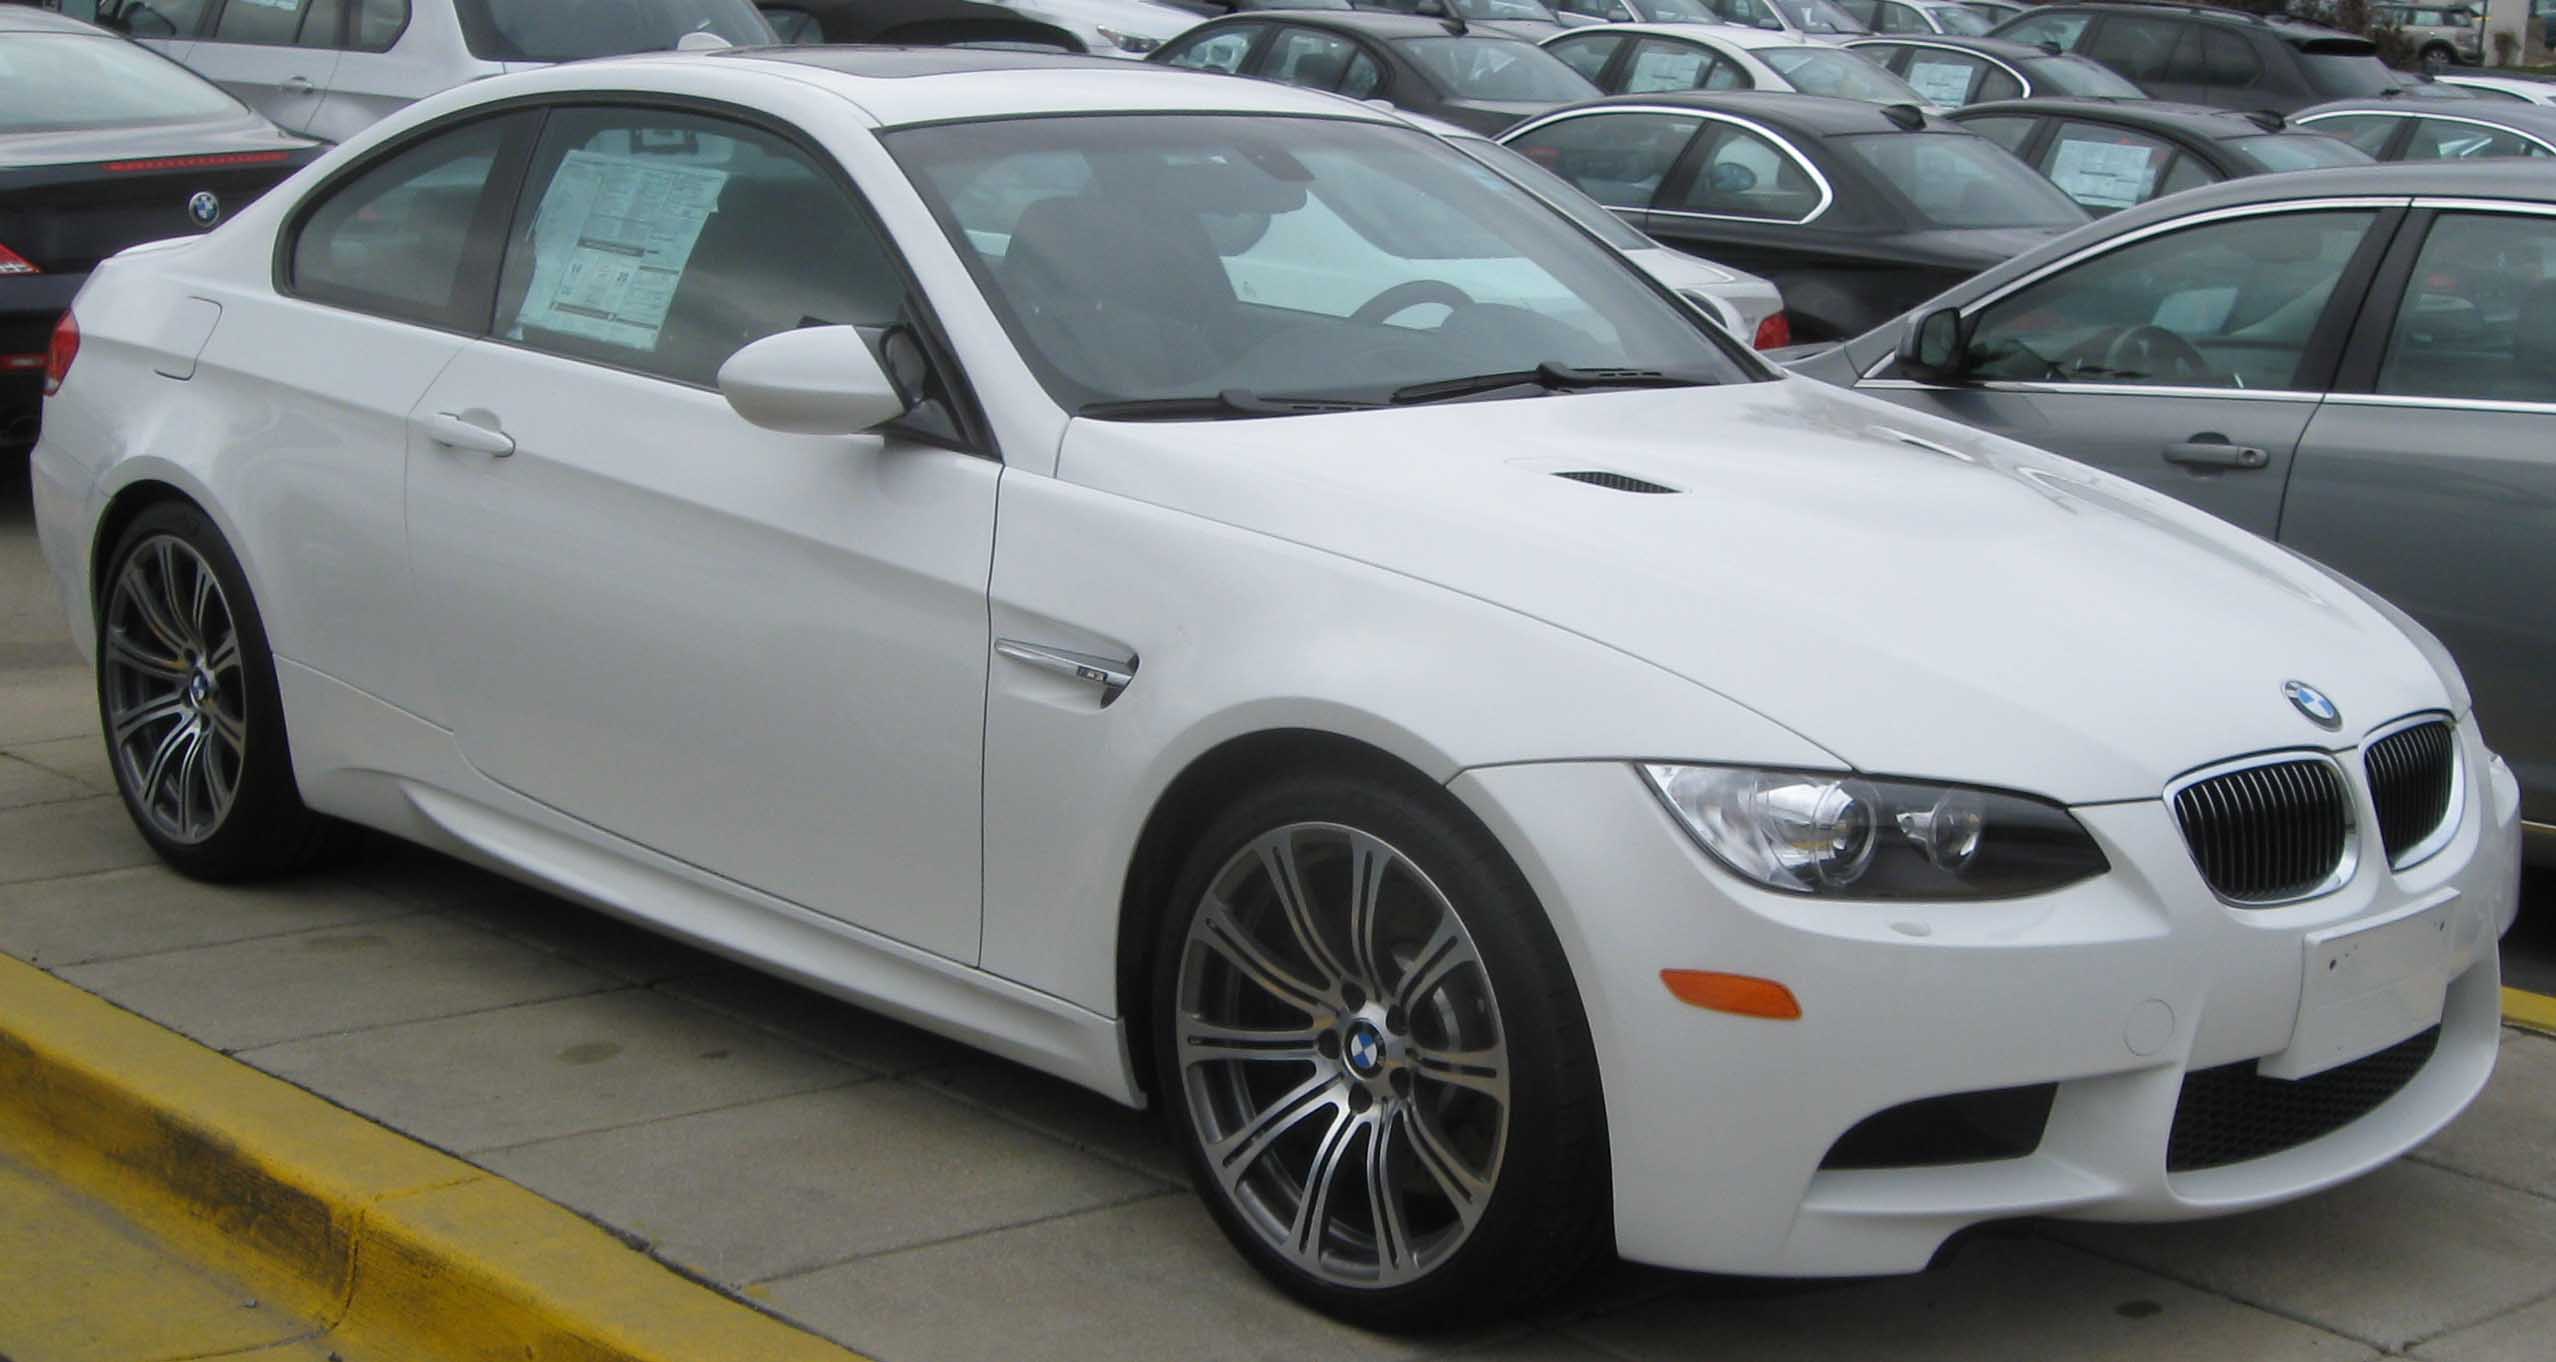 File:2009 BMW M3 coupe.jpg - Wikimedia Commons